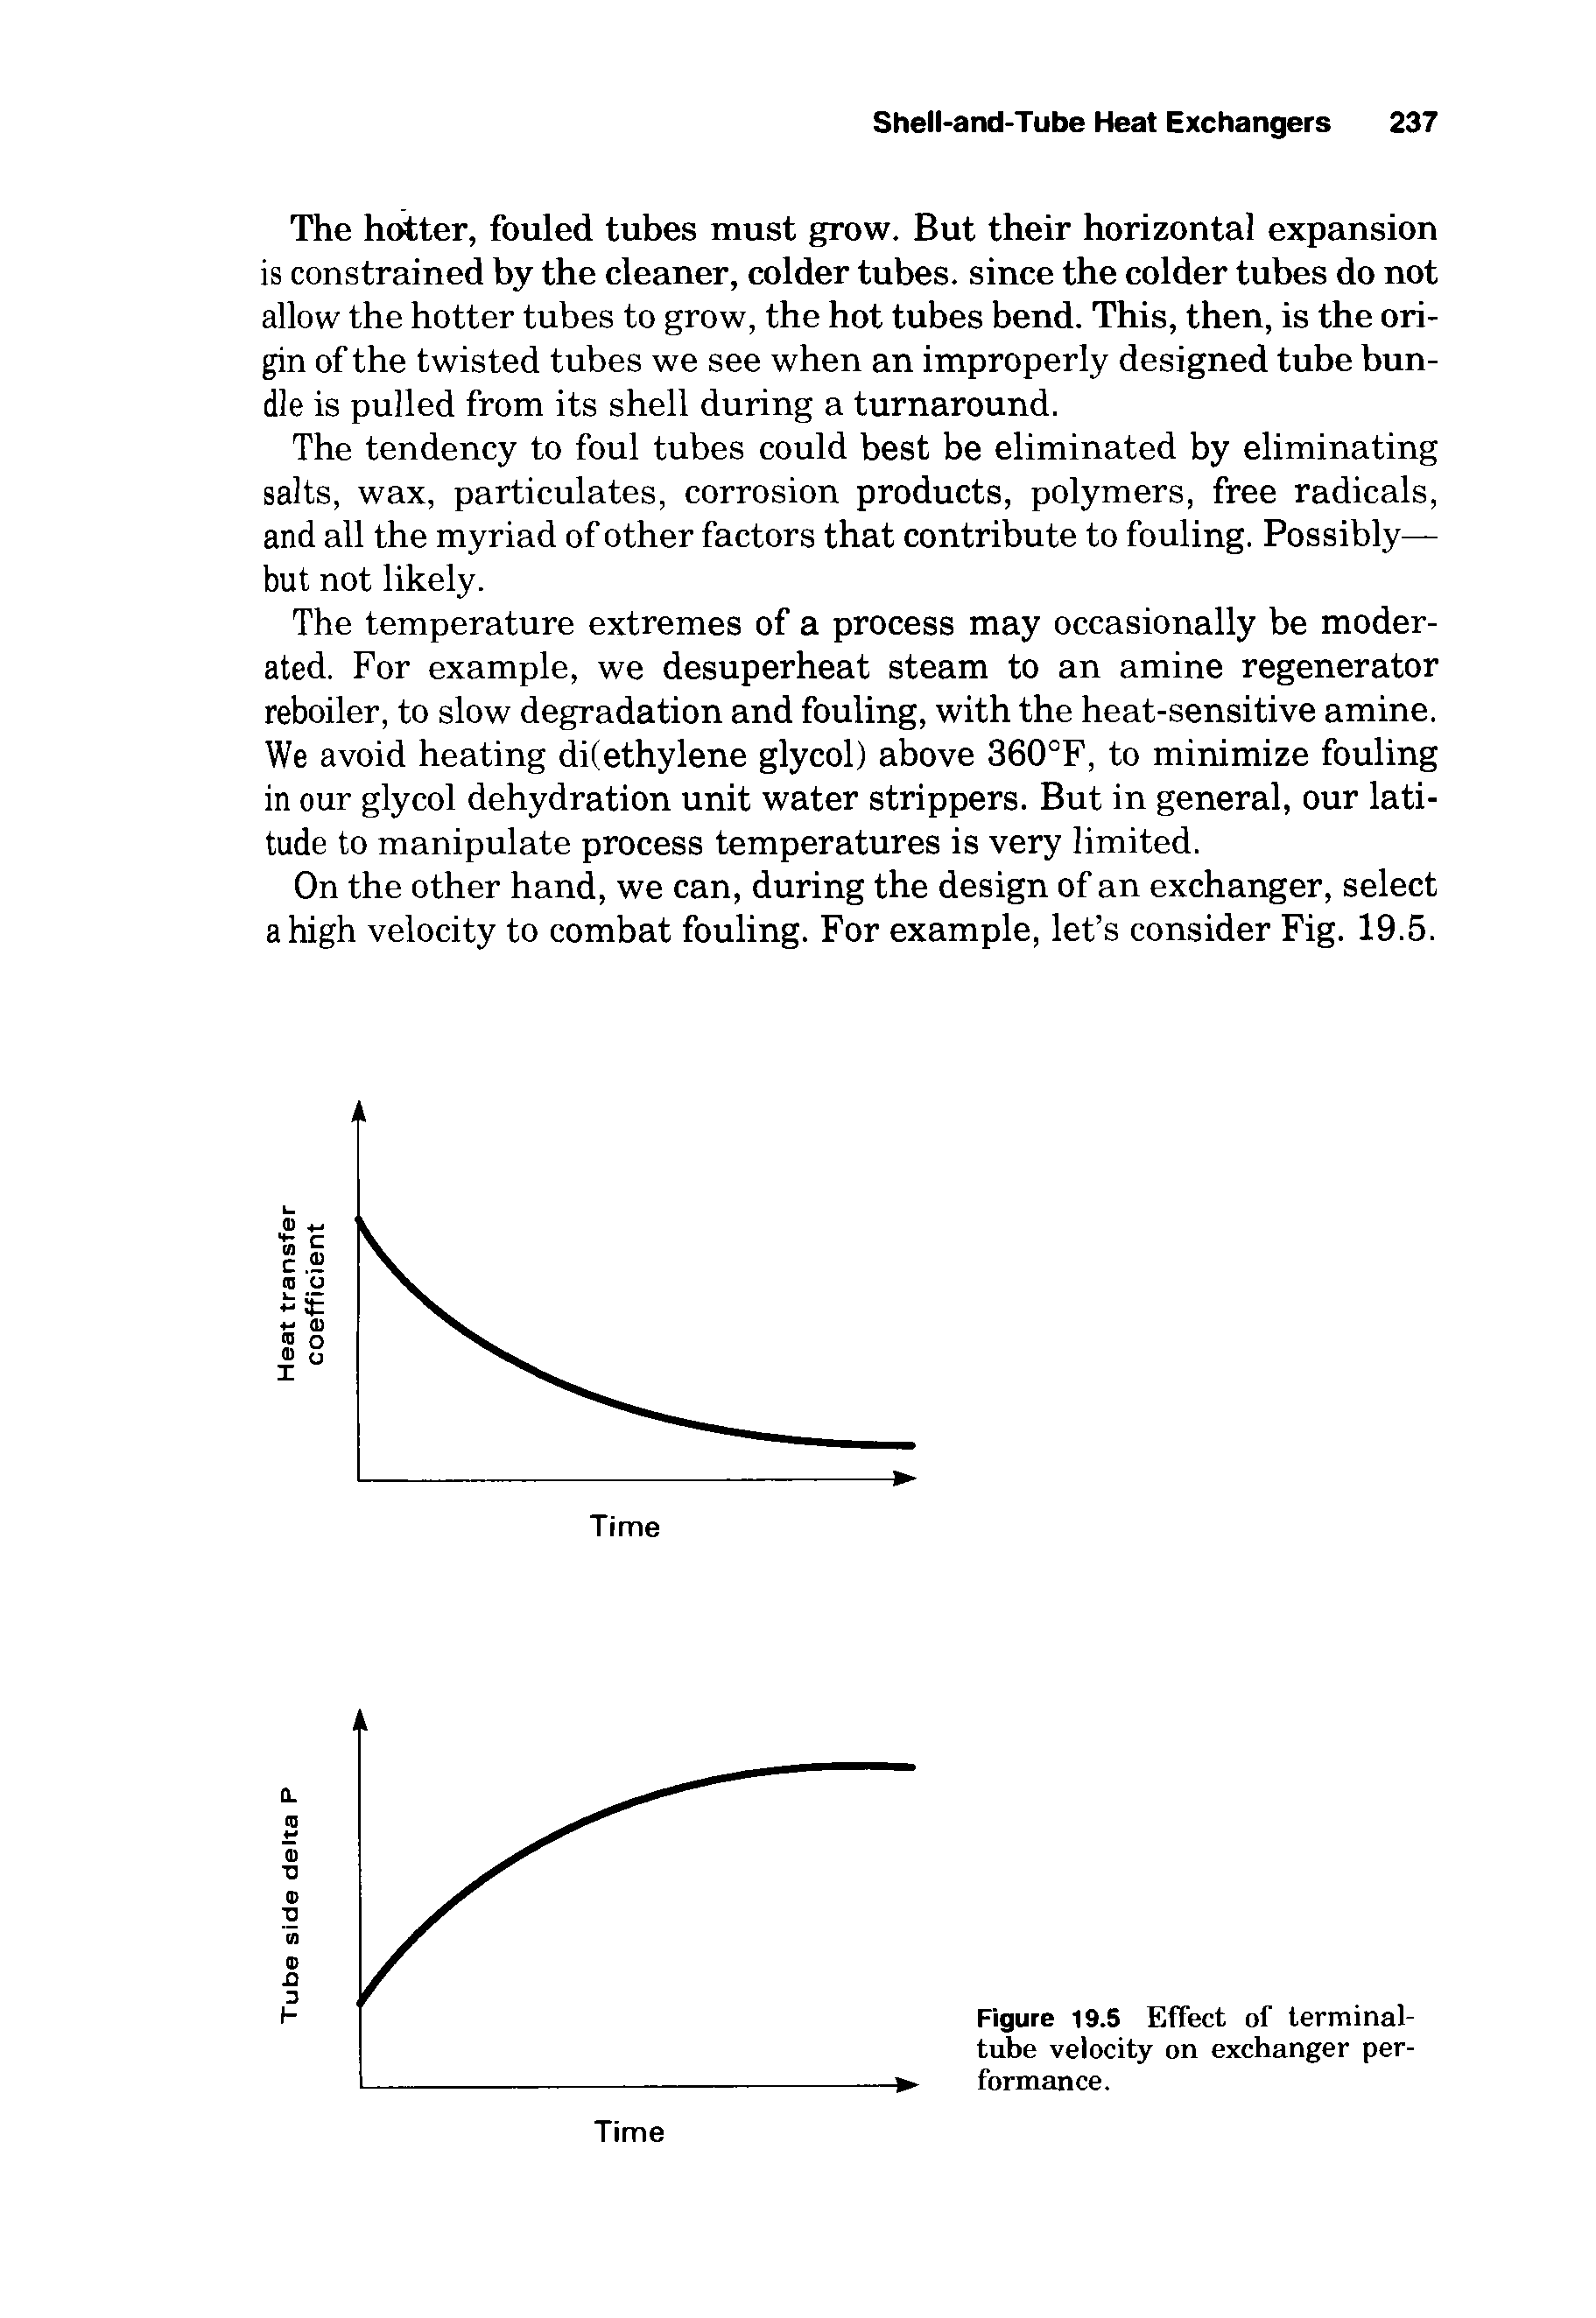 Figure 19.5 Effect of terminal-tube velocity on exchanger performance.